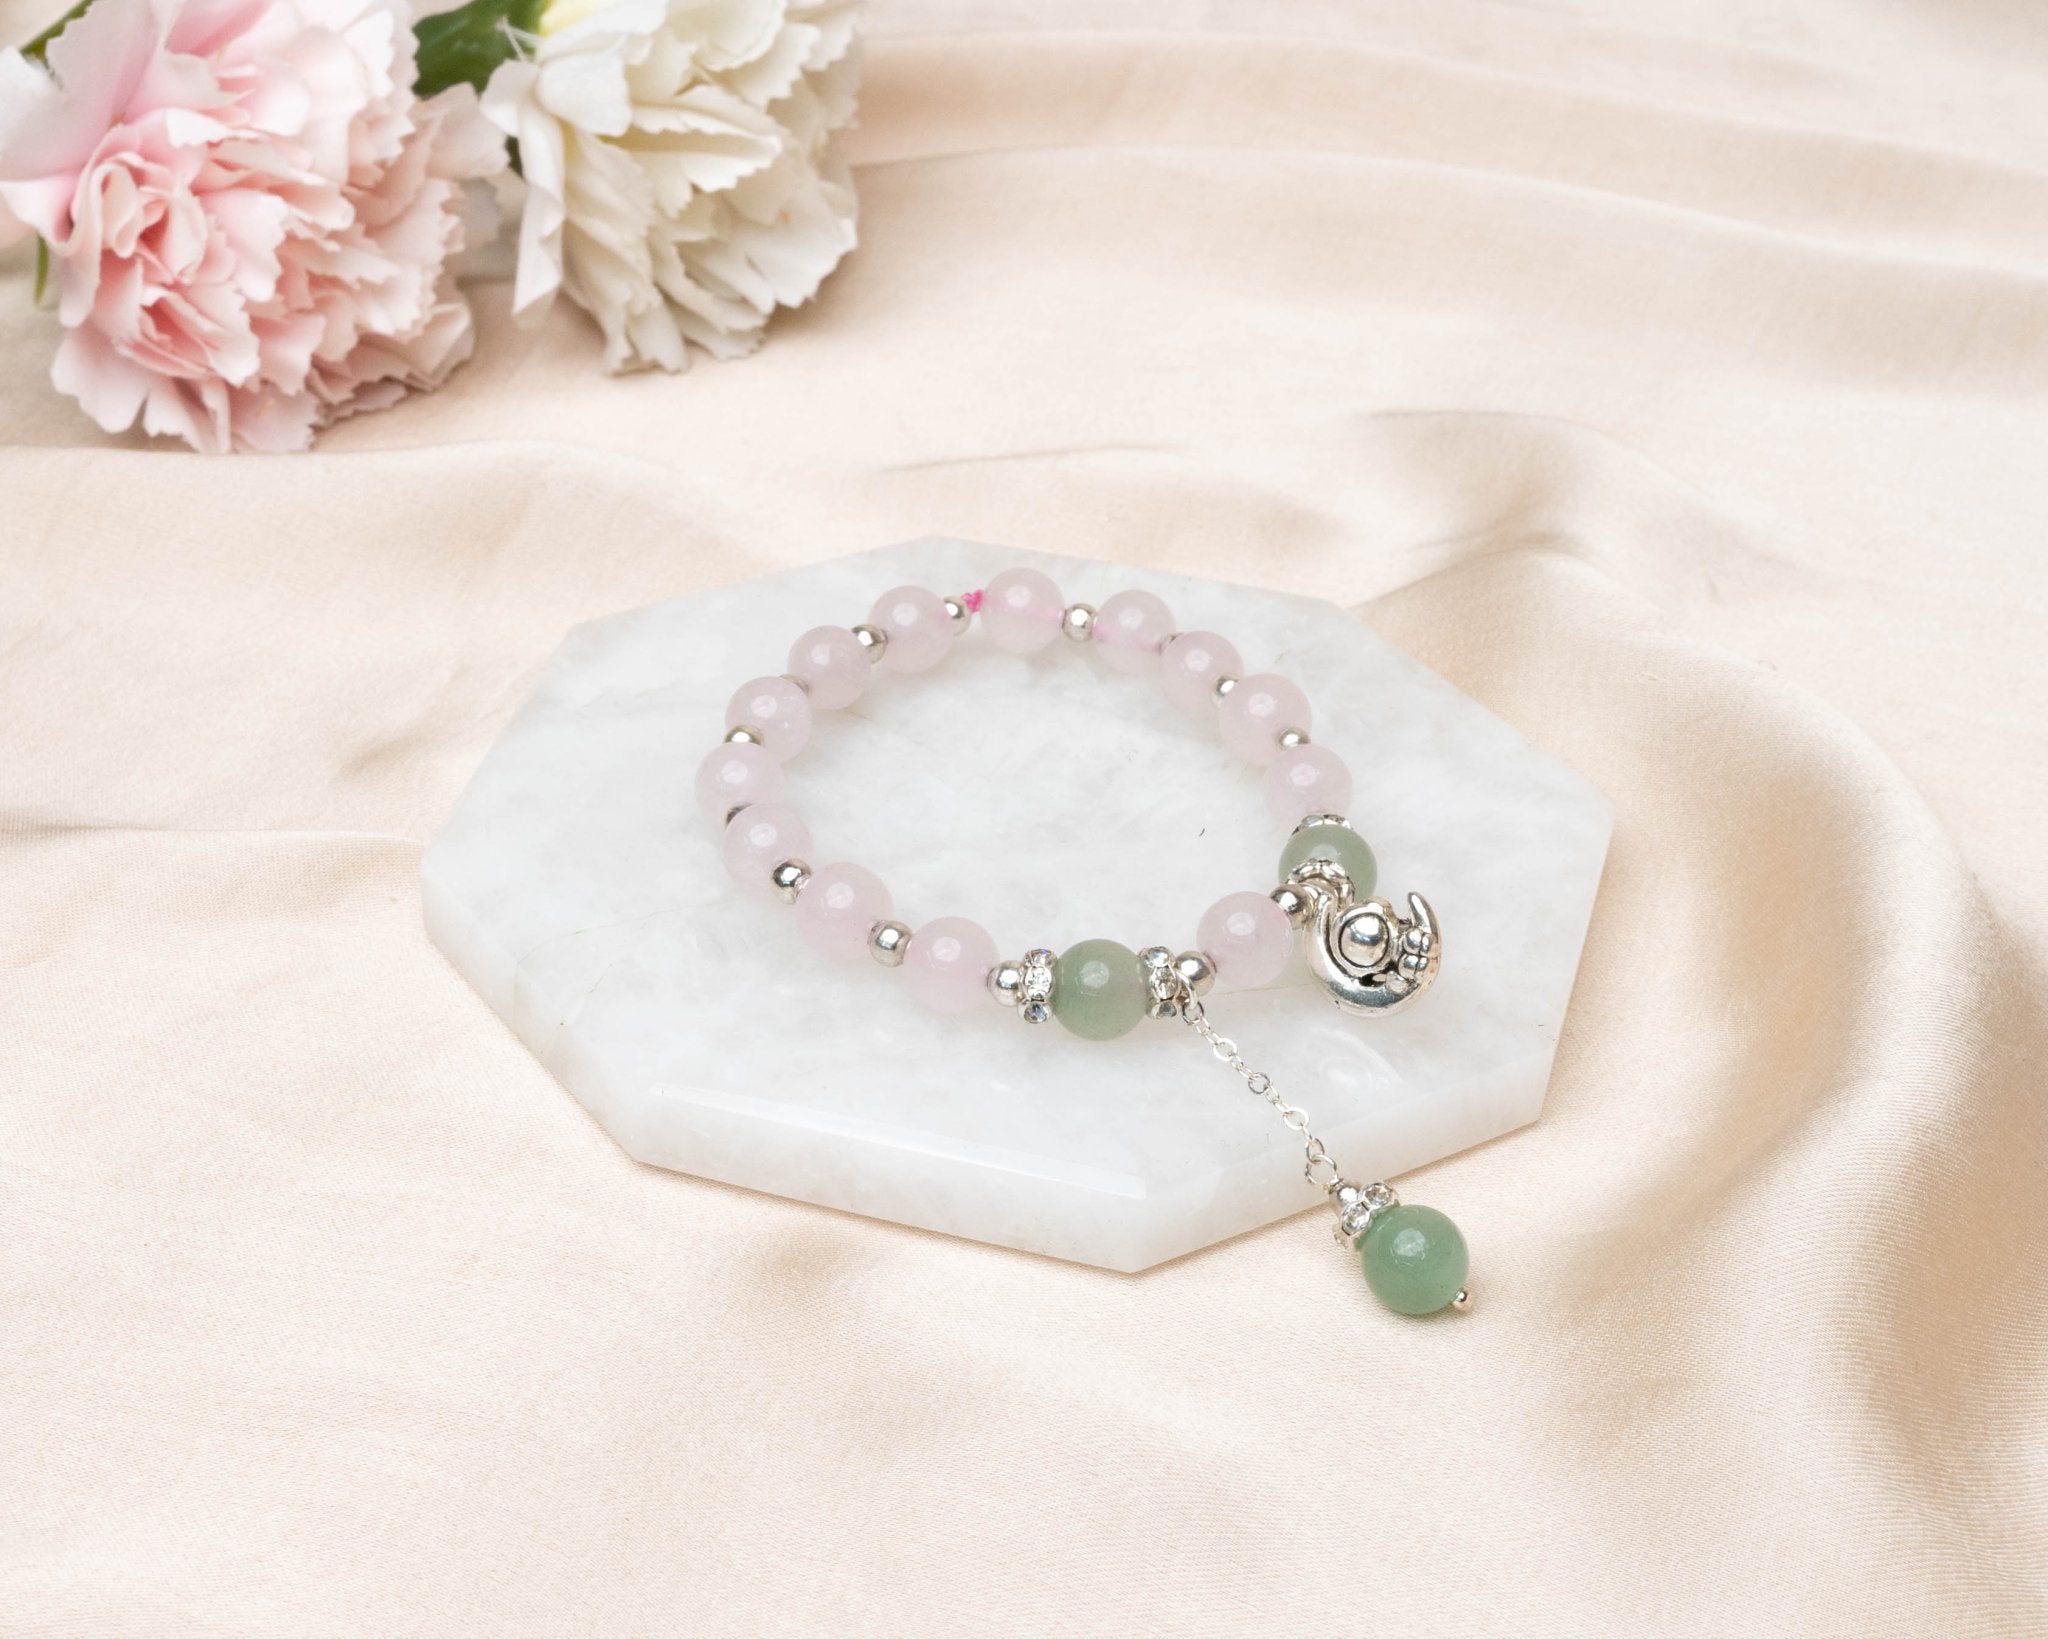 Rose Quartz, Green Aventurine With Silver Hanging Charm Lumba - Bodh Gem and Crystals